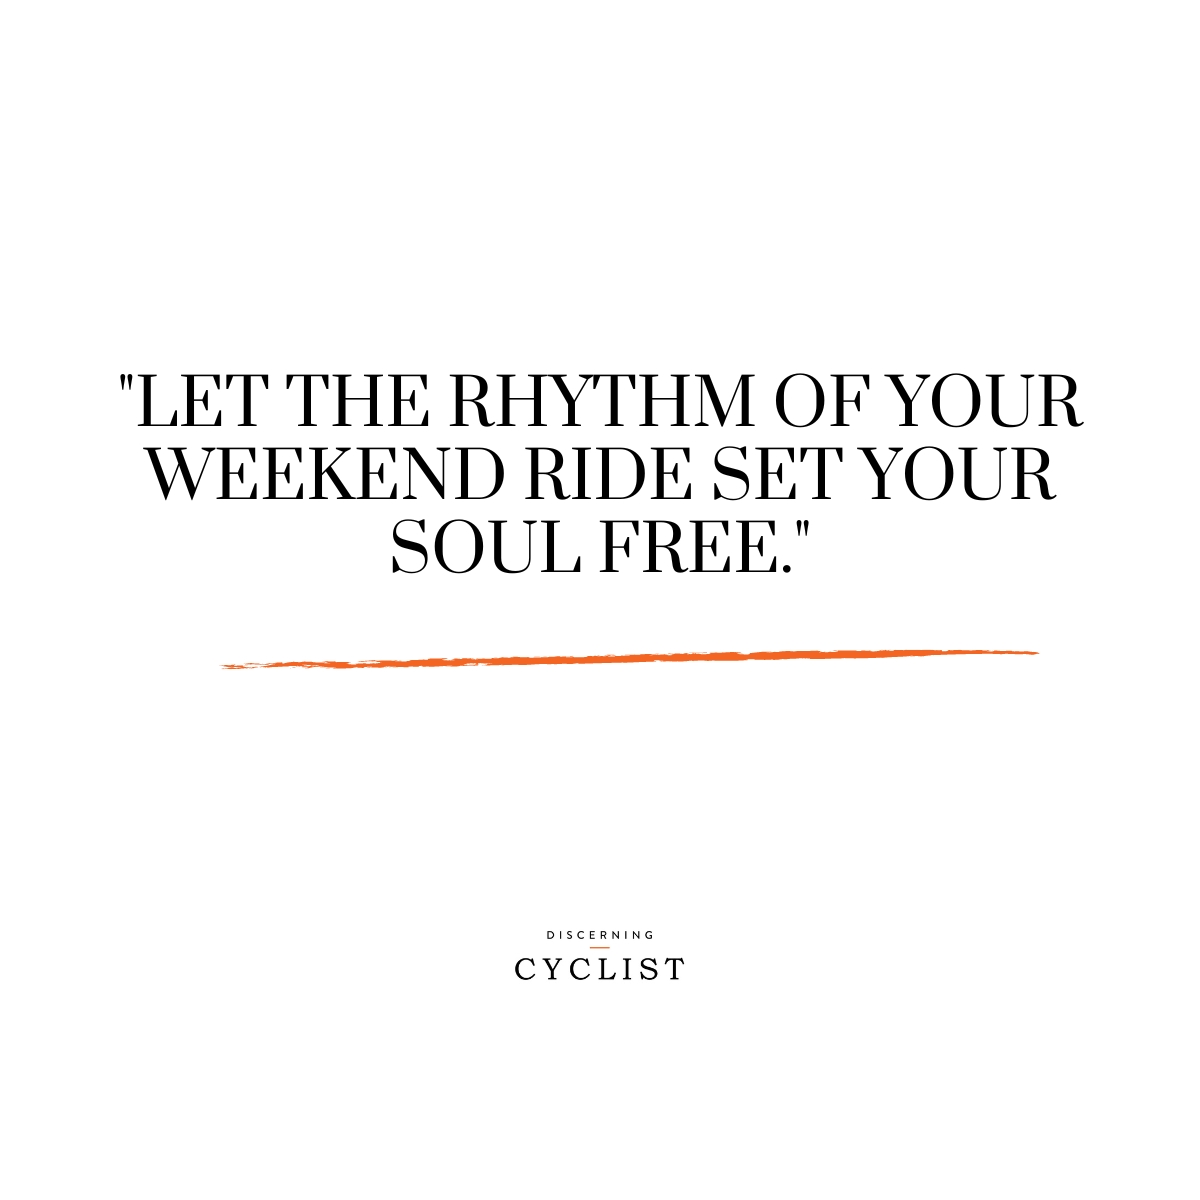 "Let the rhythm of your weekend ride set your soul free."